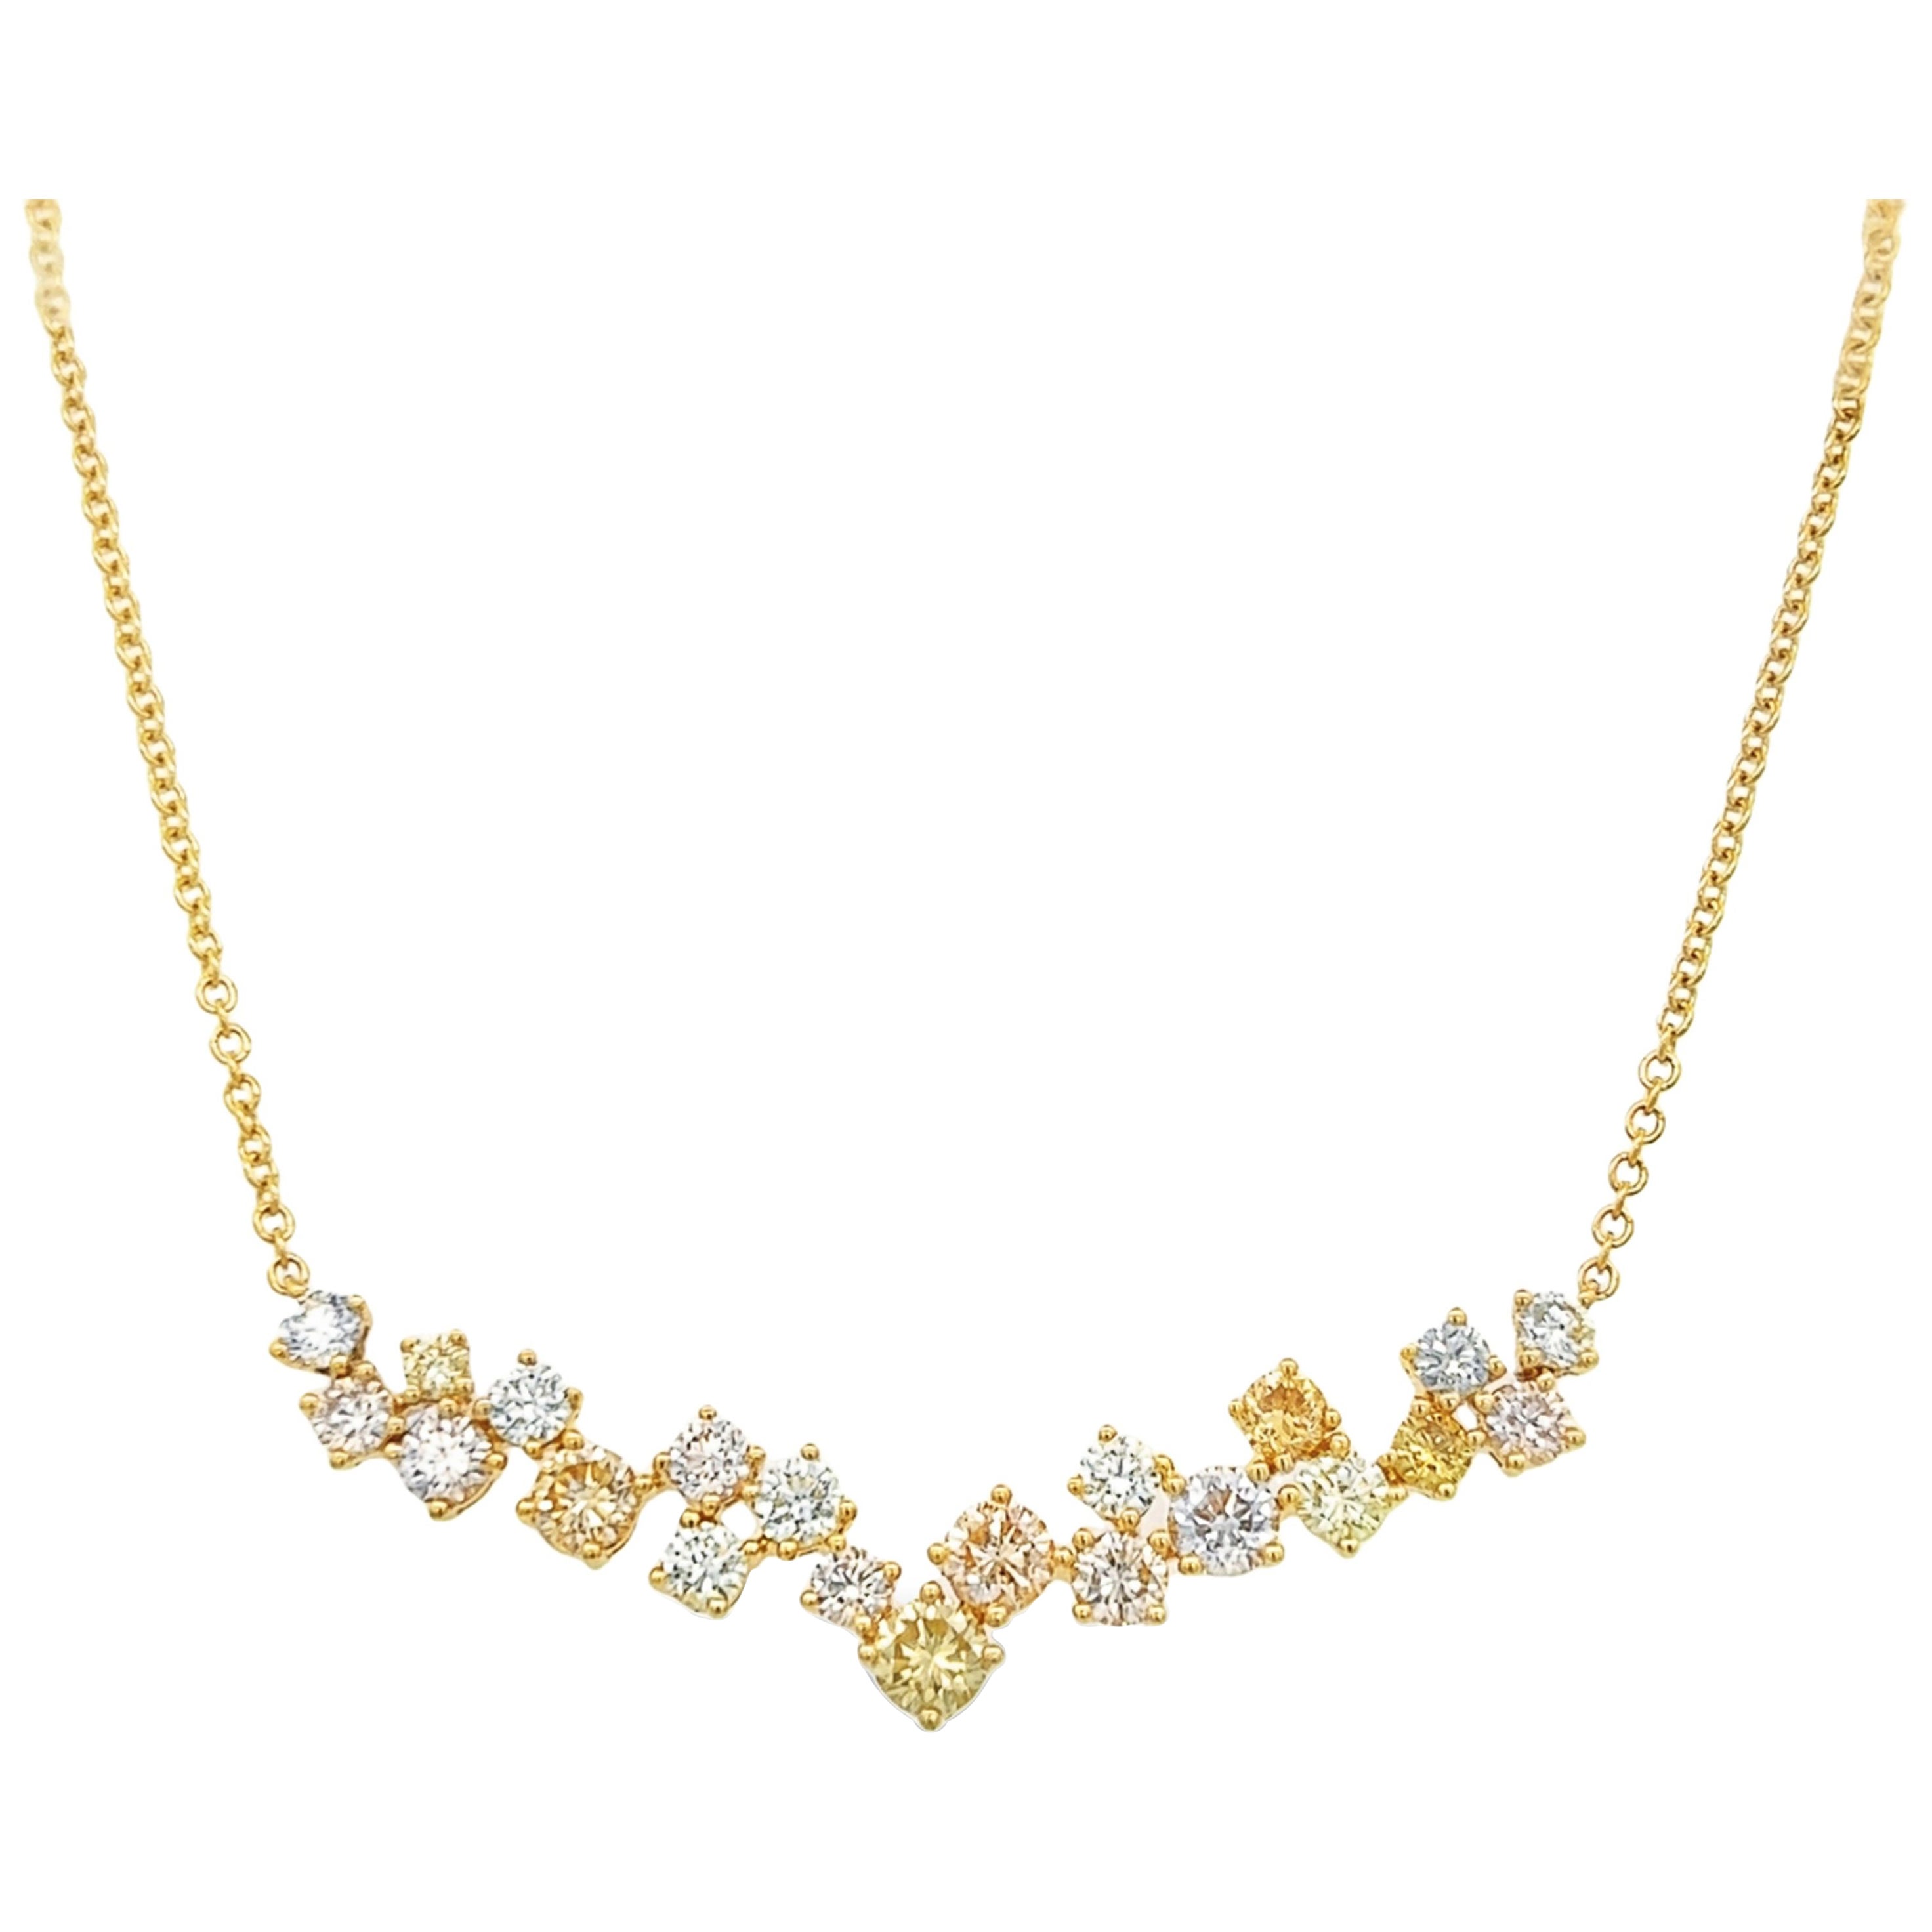 Alexander Beverly Hills 4.56cat White & Yellow Diamond Pendant Necklace 18k For Sale